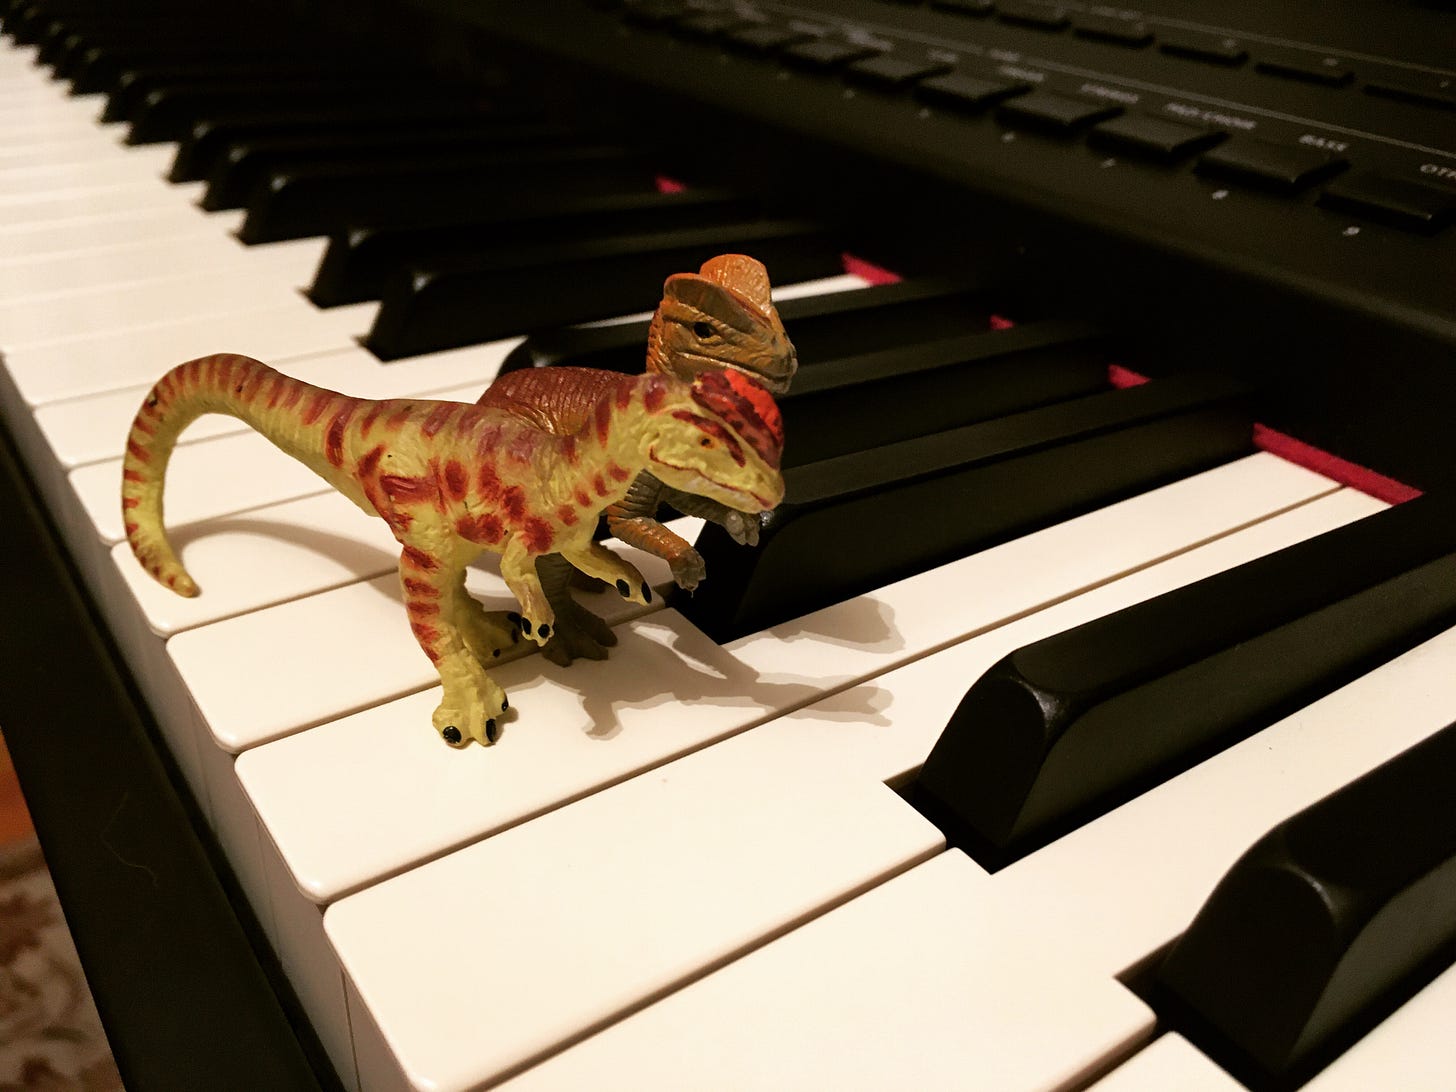 Two plastic specimens of Dilophosaurus sitting atop a piano keyboard, looking for food, perhaps a Sarahsaurus.